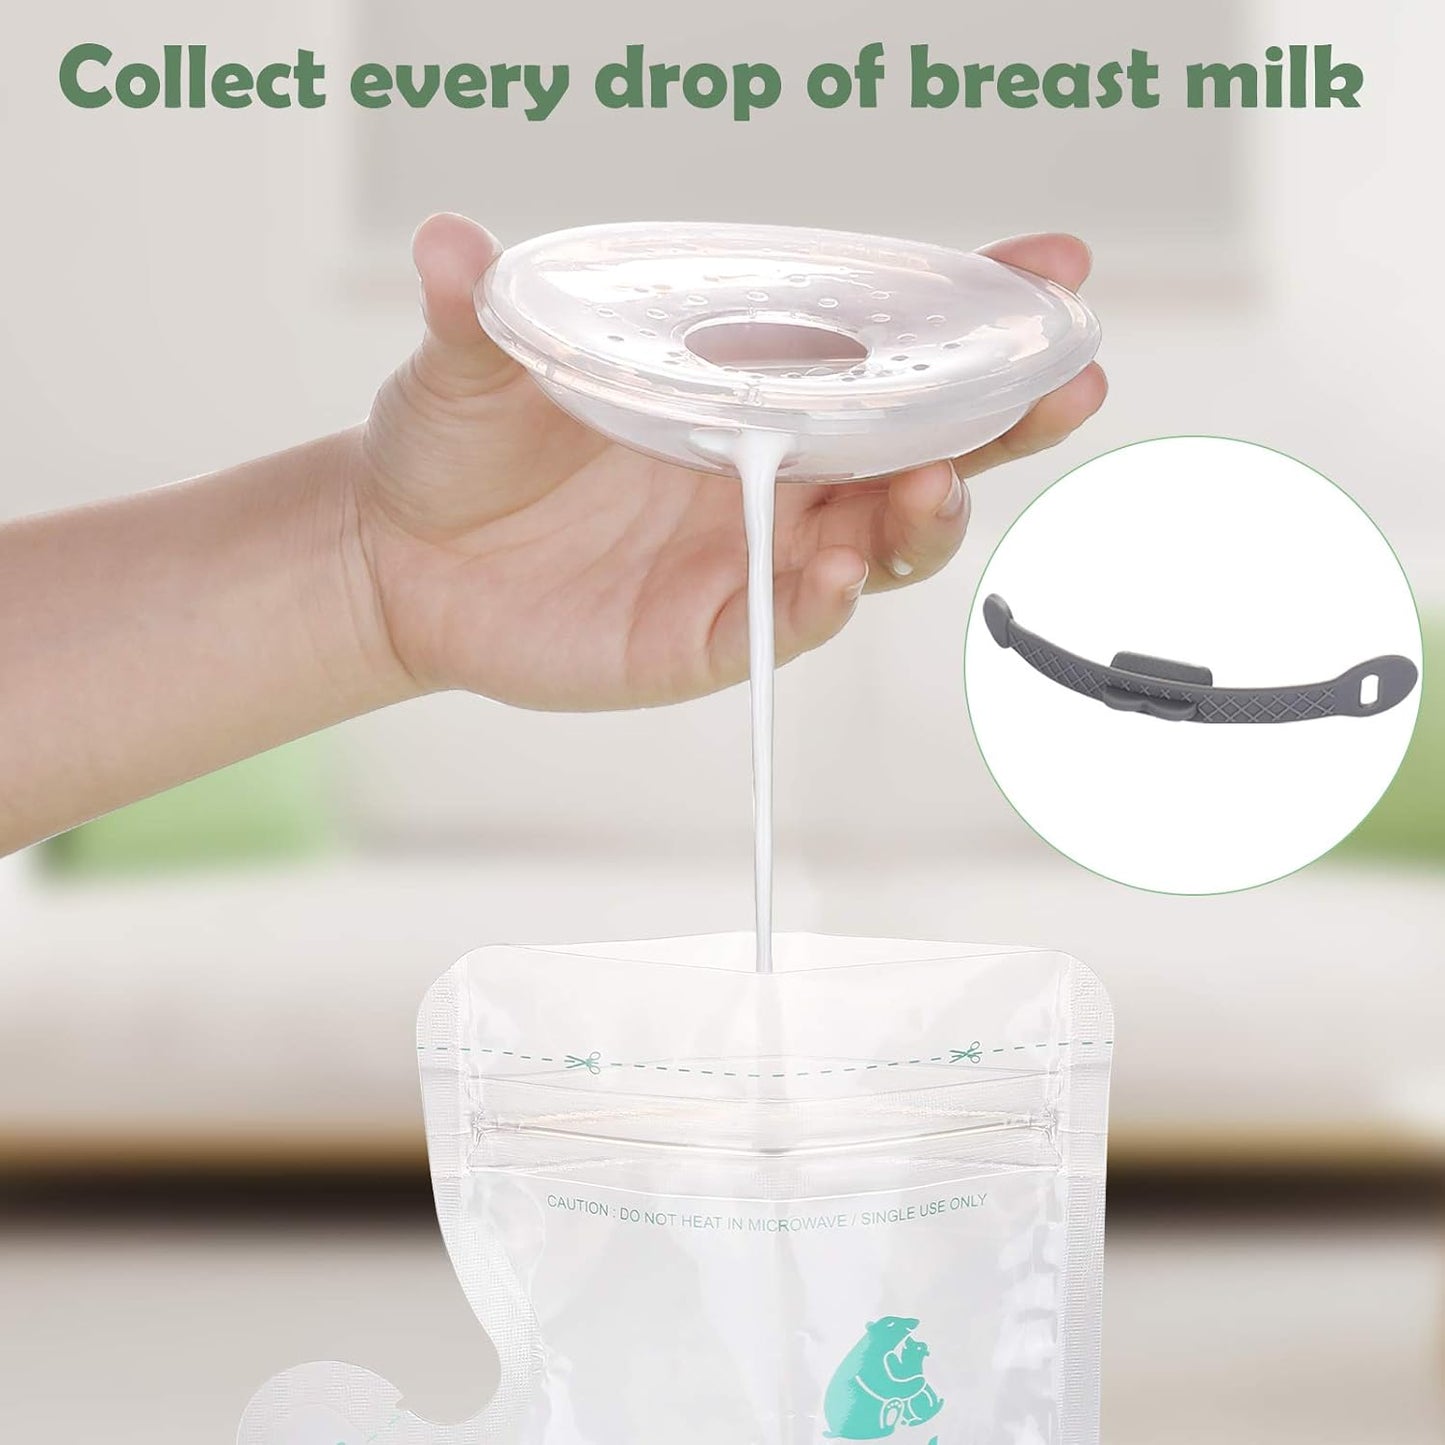 Lictin Breast Shell Breastmilk Collector for Breastfeeding-2 Pcs Silicone Breast Pad Nursing Cup Milk Saver for Nursing Moms Protect Sore Nipples Soft and Reusable with Box